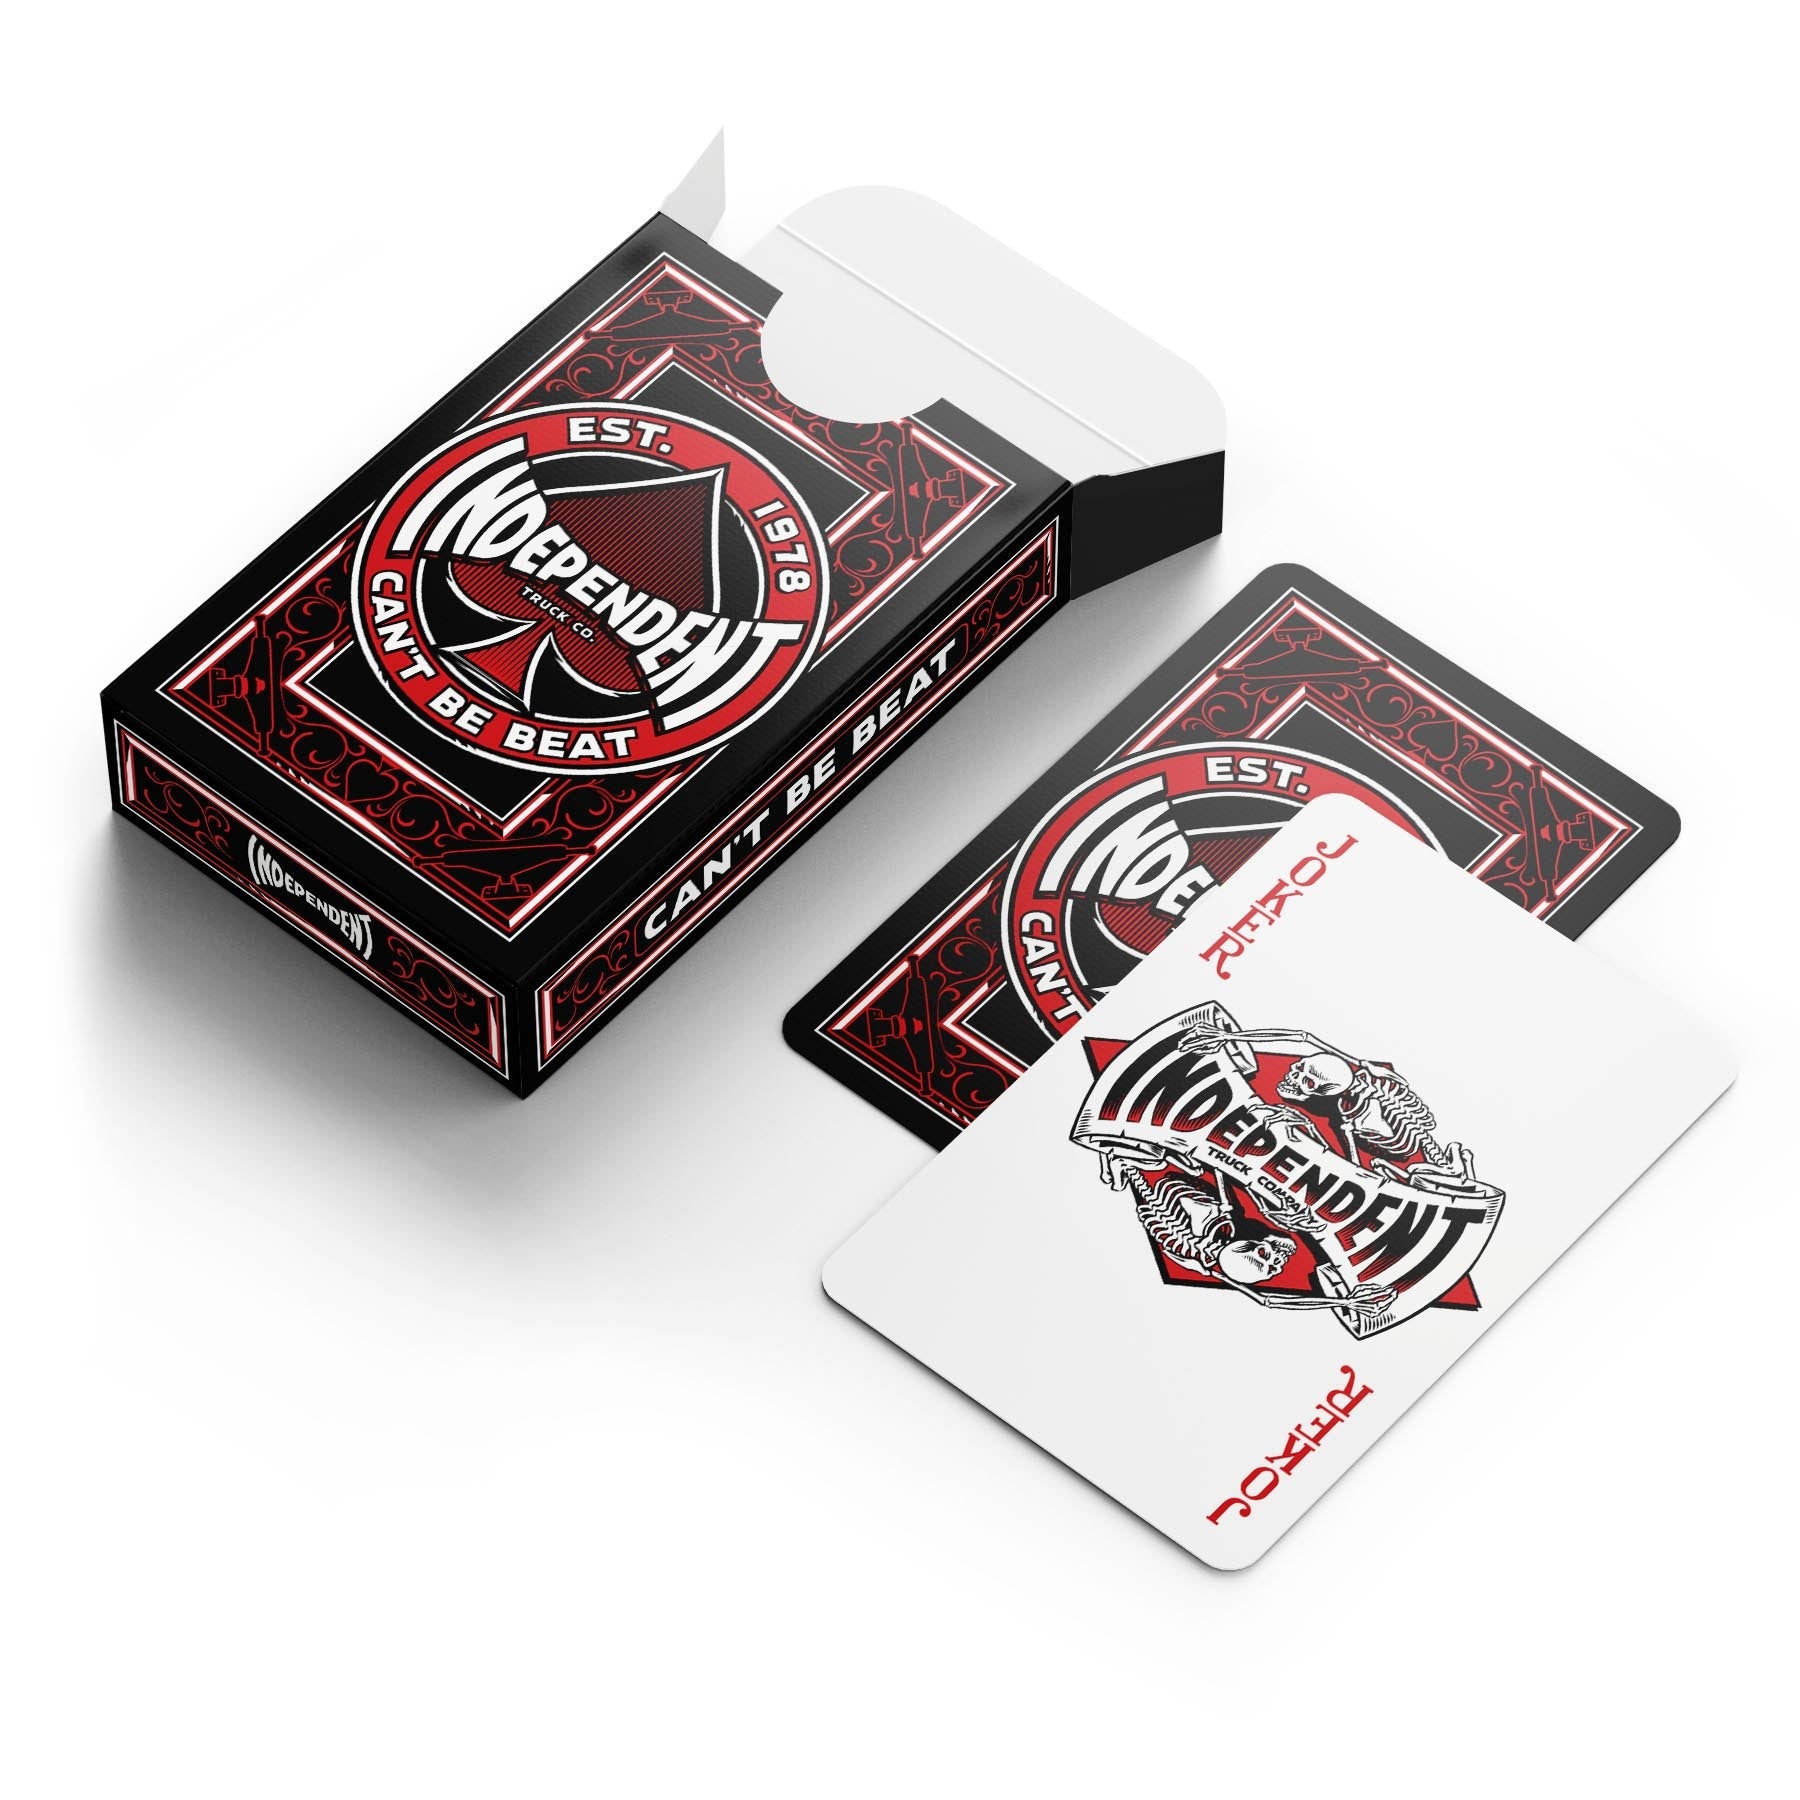 INDEPENDENT PLAYING CARDS "CANT BE BEAT"